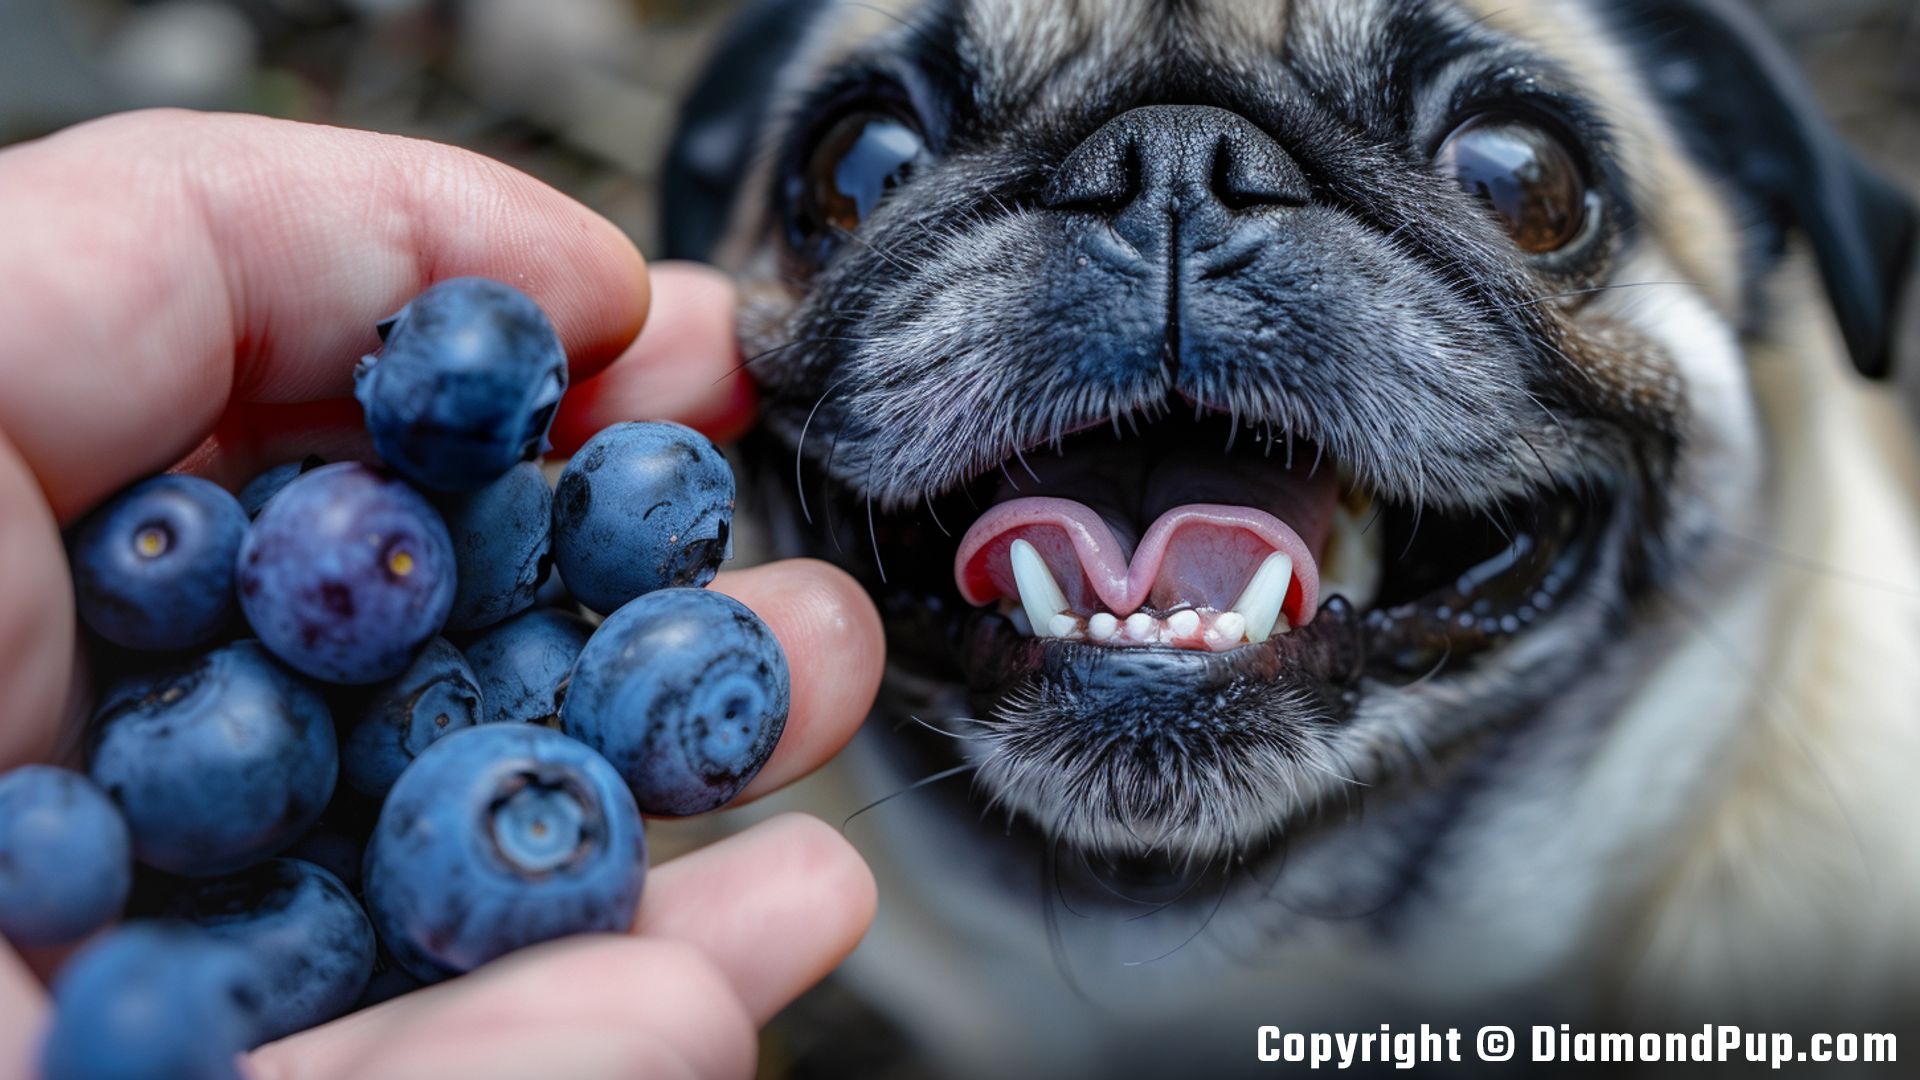 Image of a Playful Pug Eating Blueberries